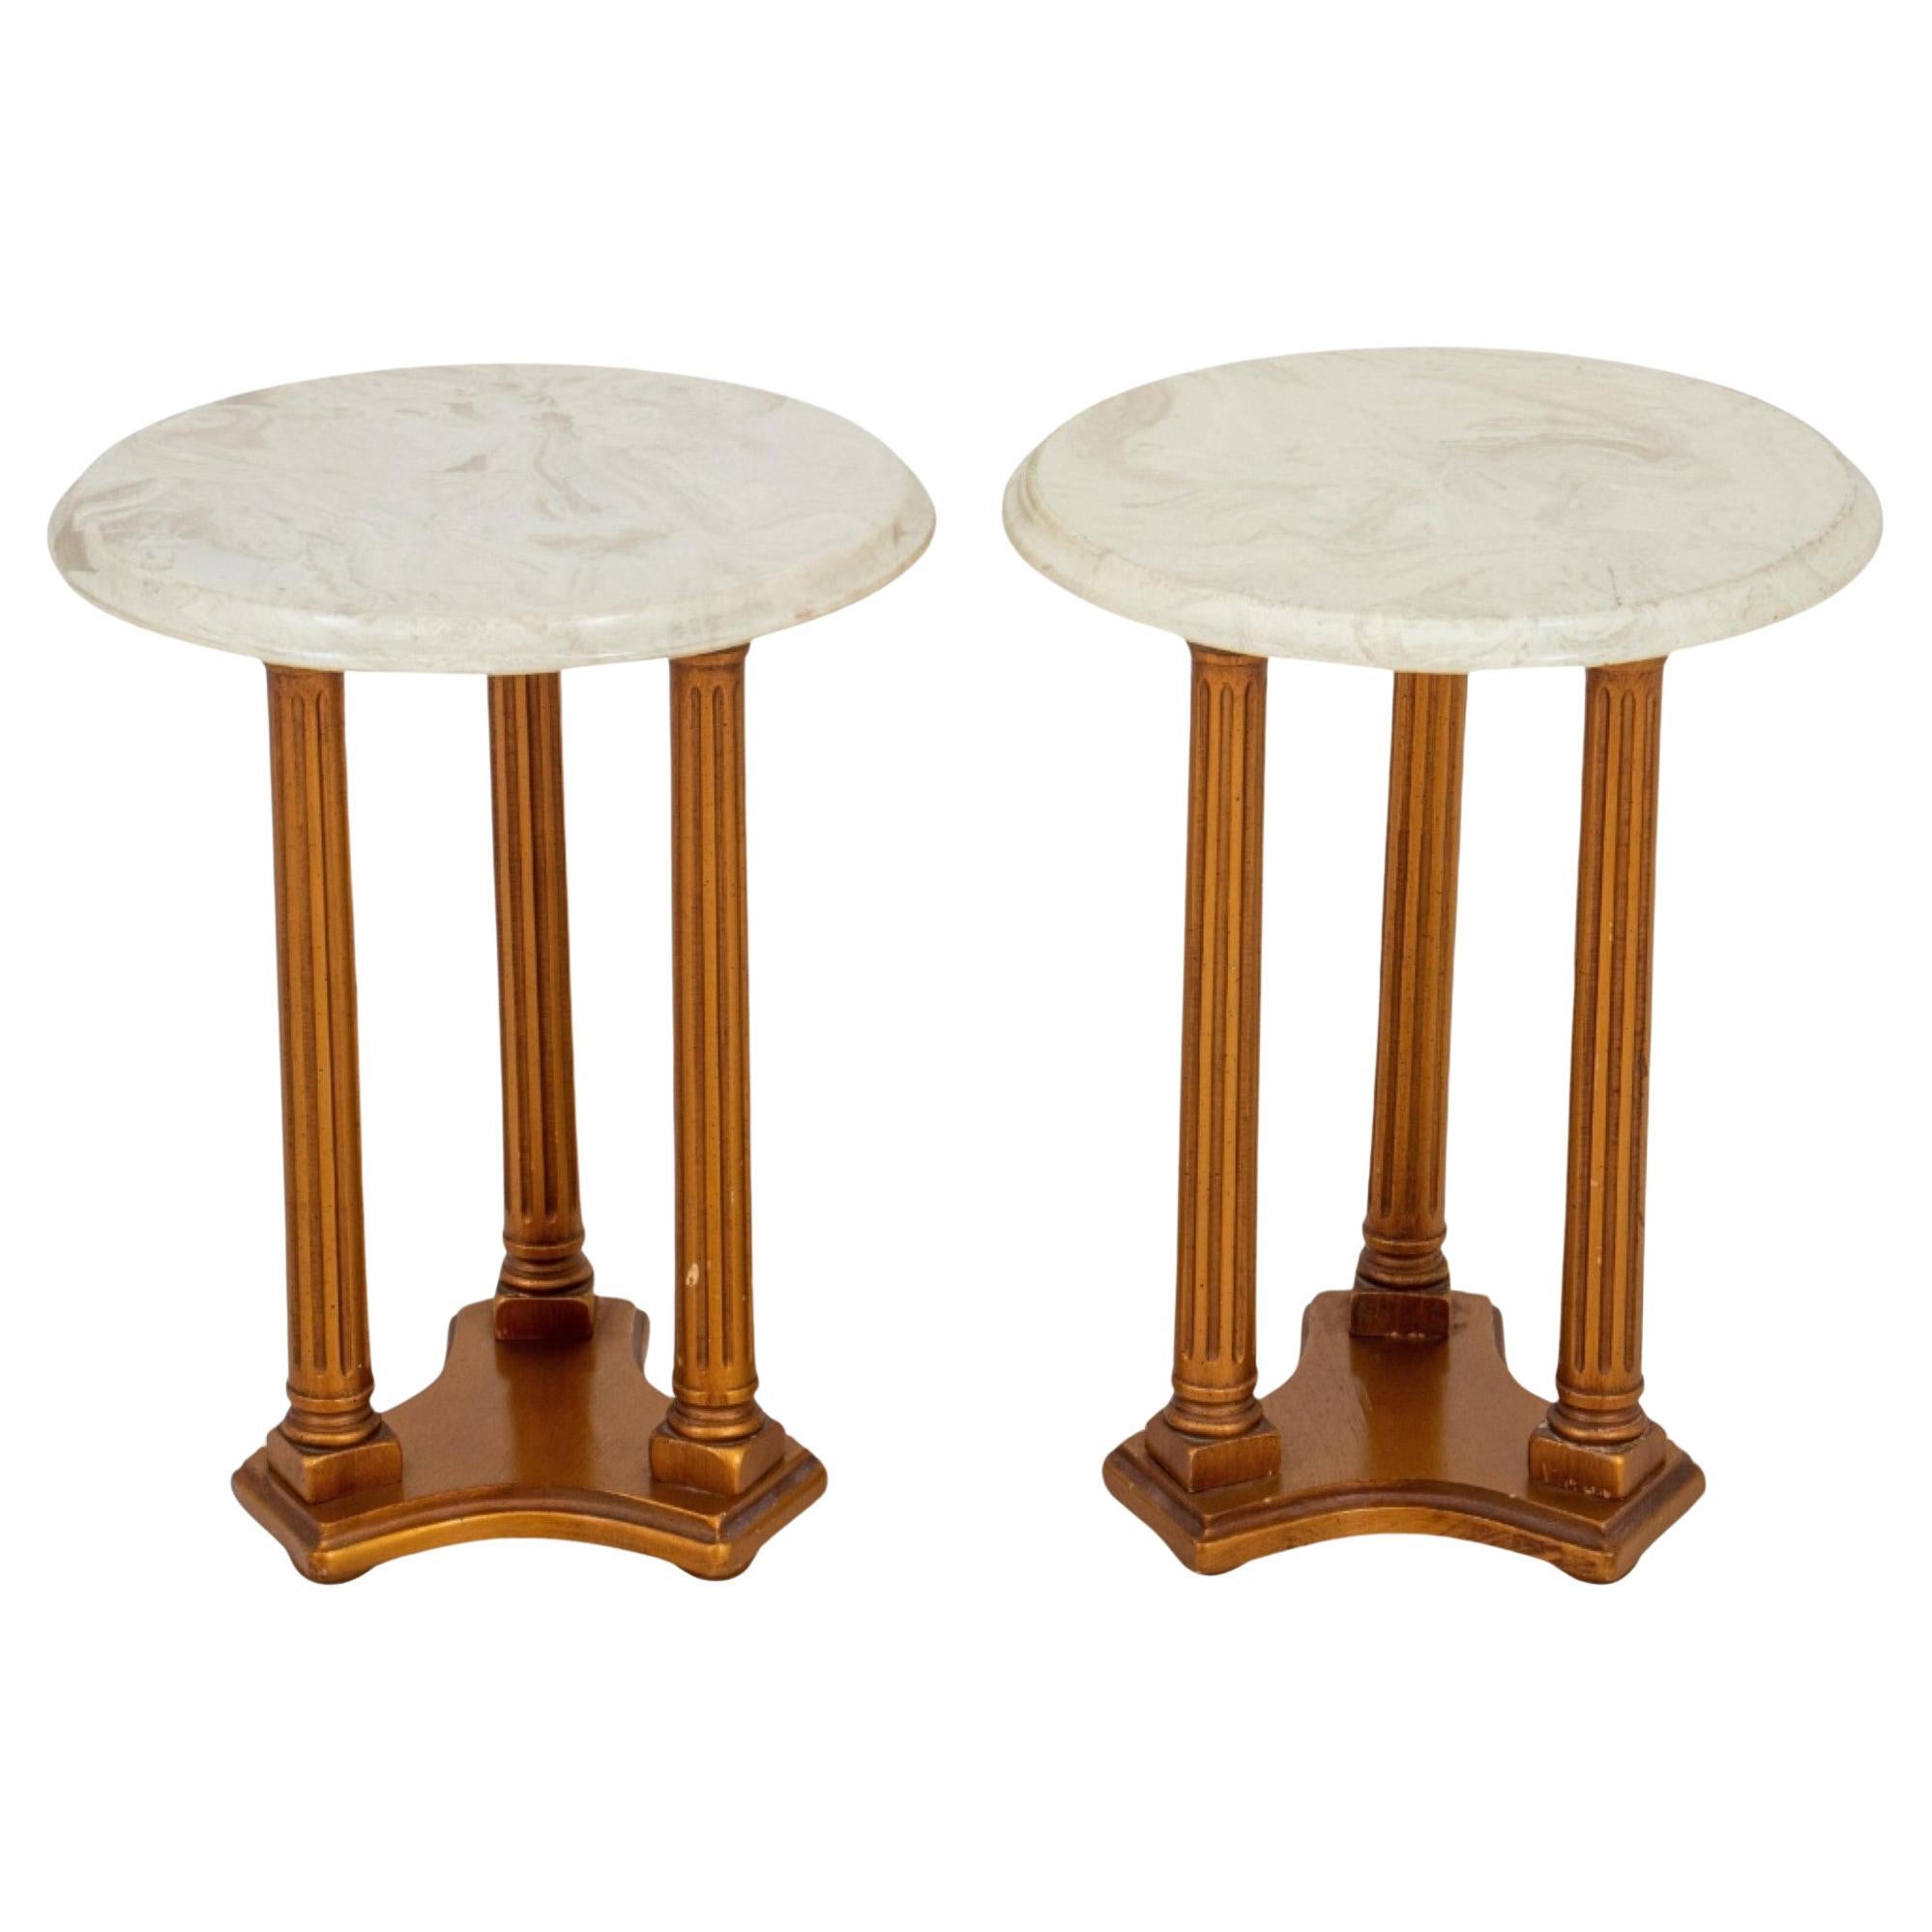 Neoclassical Revival Gilt Wood Side Table, 2 For Sale